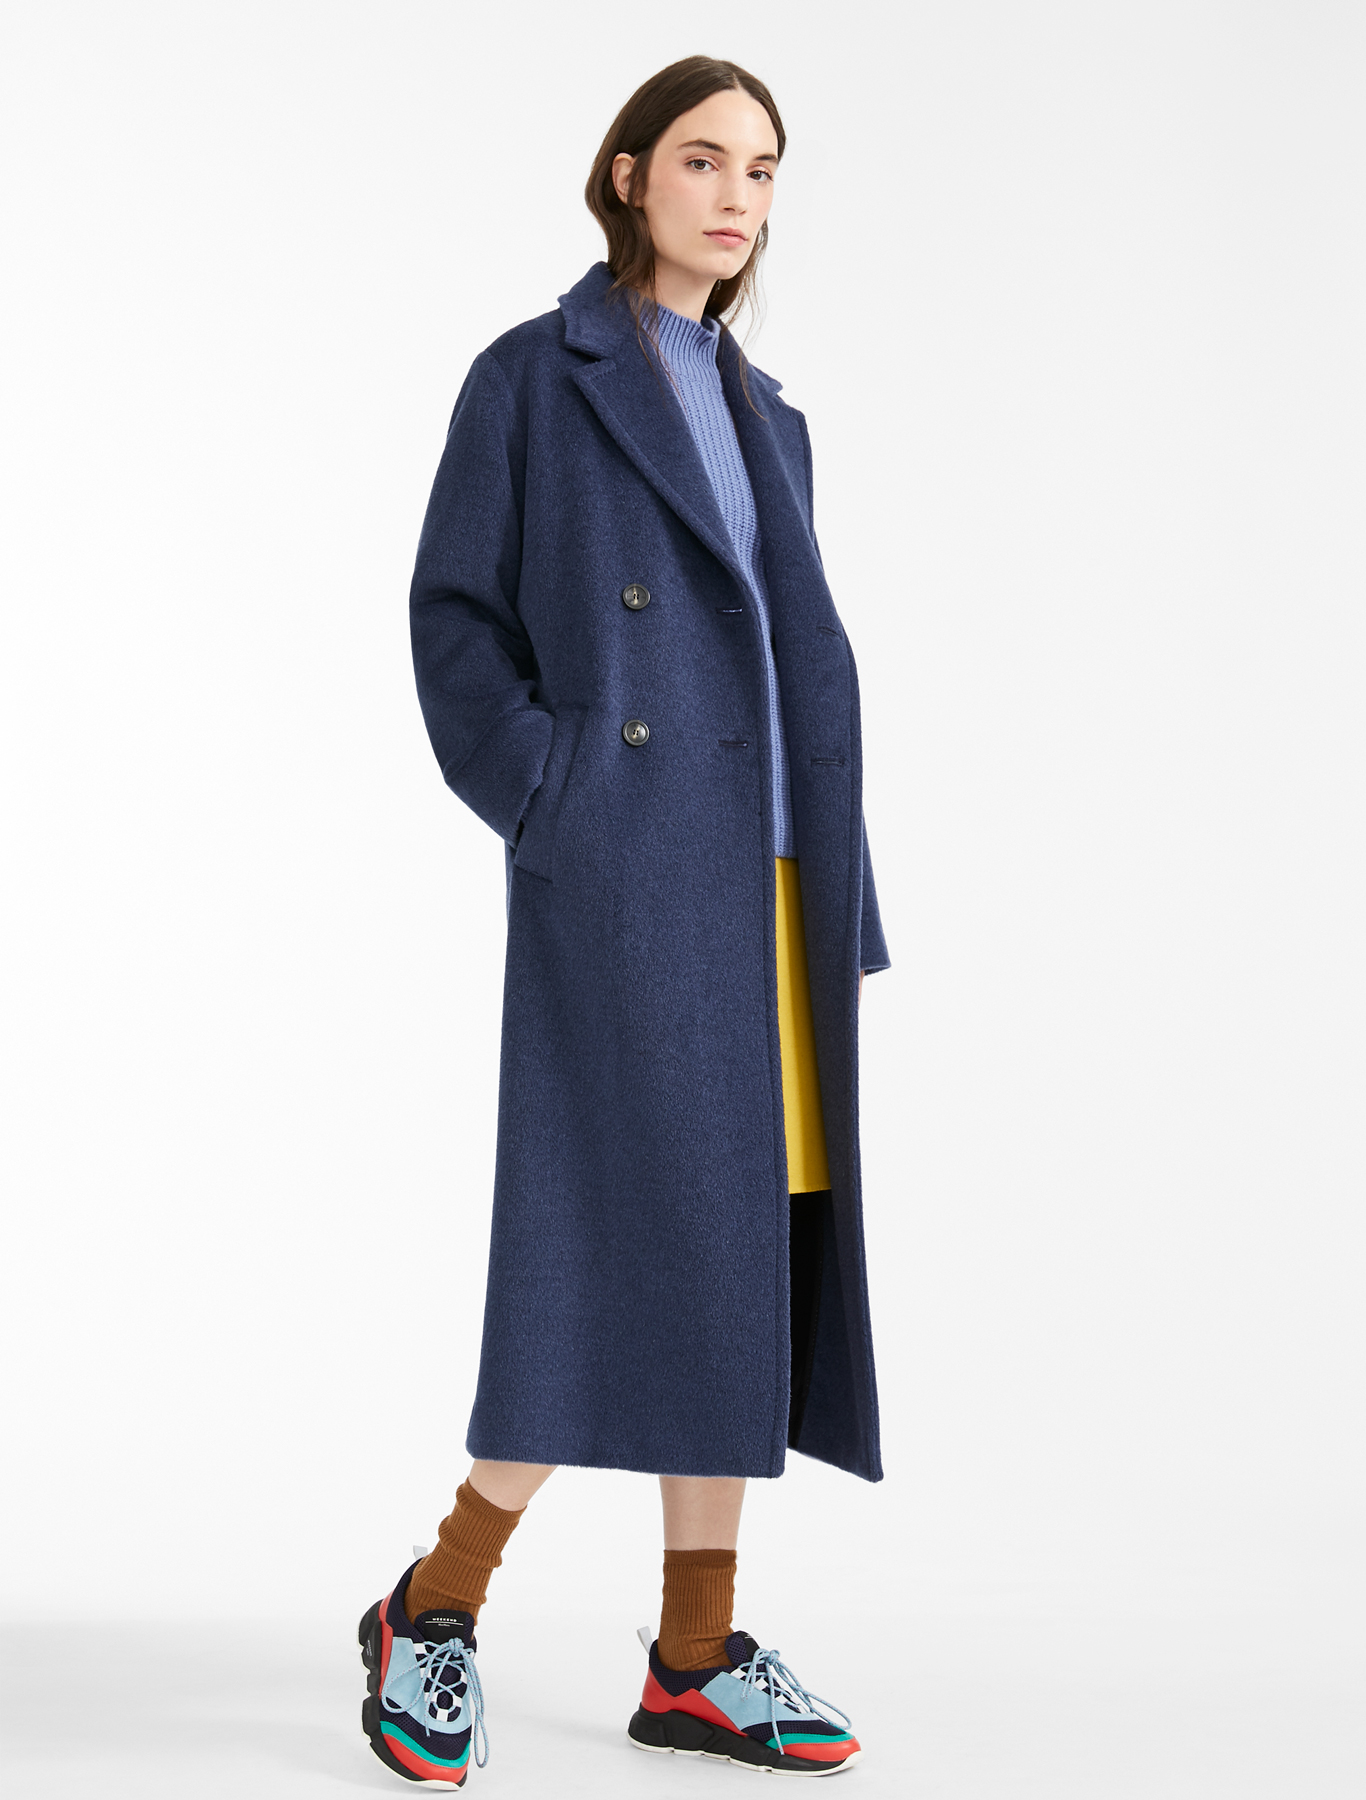 Teddy Max Mara Coat Clearance, 53% OFF | www.angloamericancentre.it